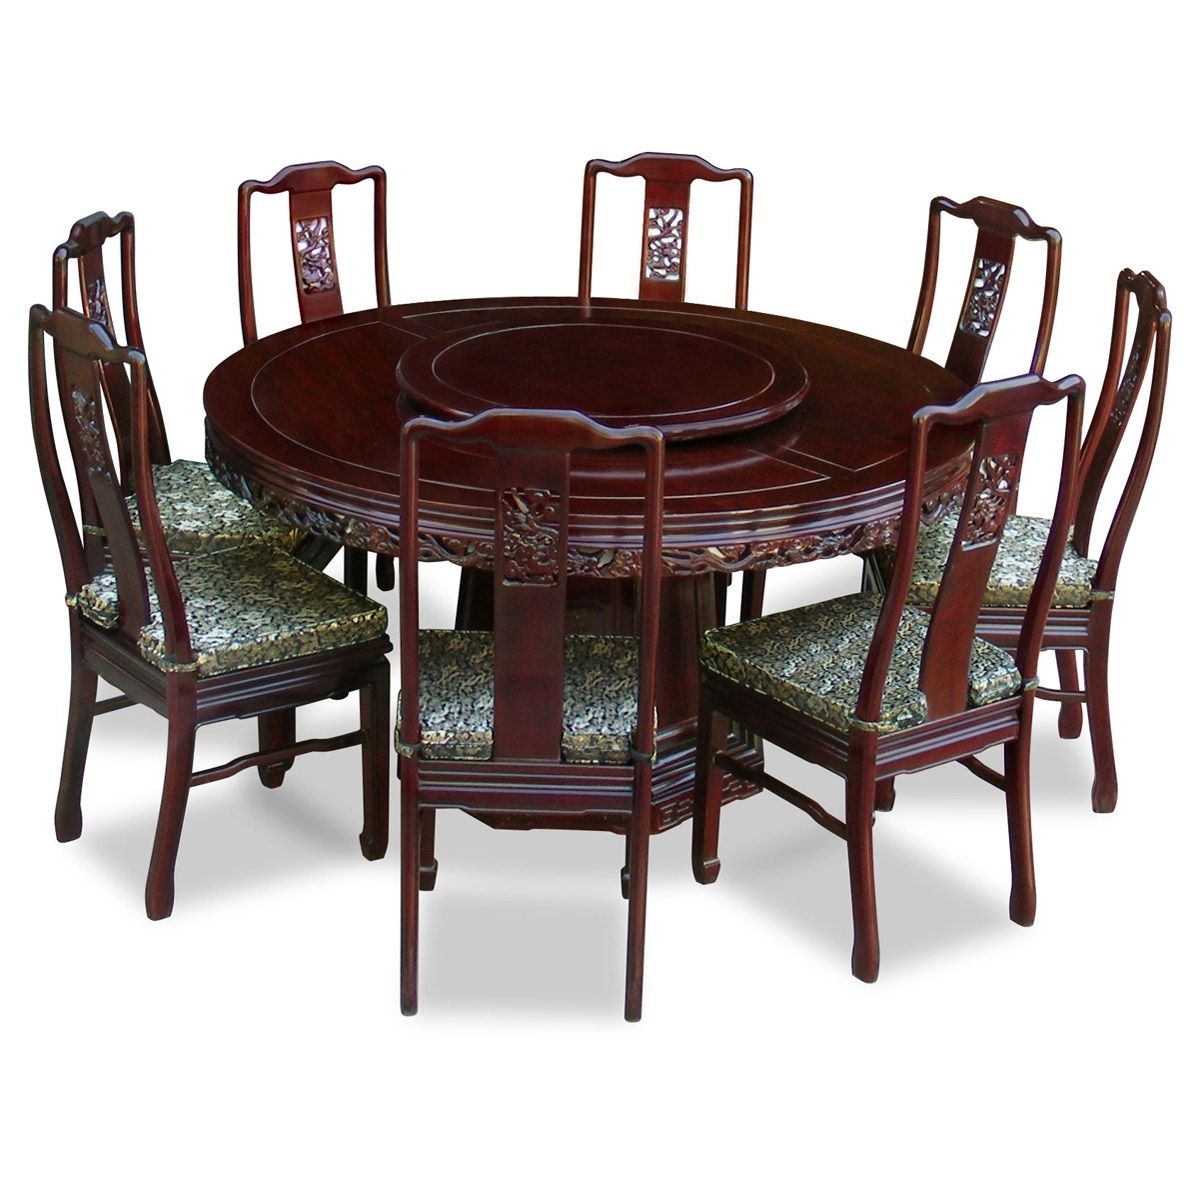 Fabulous Round Dining Table For 8 Ideas Decofurnish Rolling Dining Inside Most Popular 8 Seater Round Dining Table And Chairs (View 14 of 25)